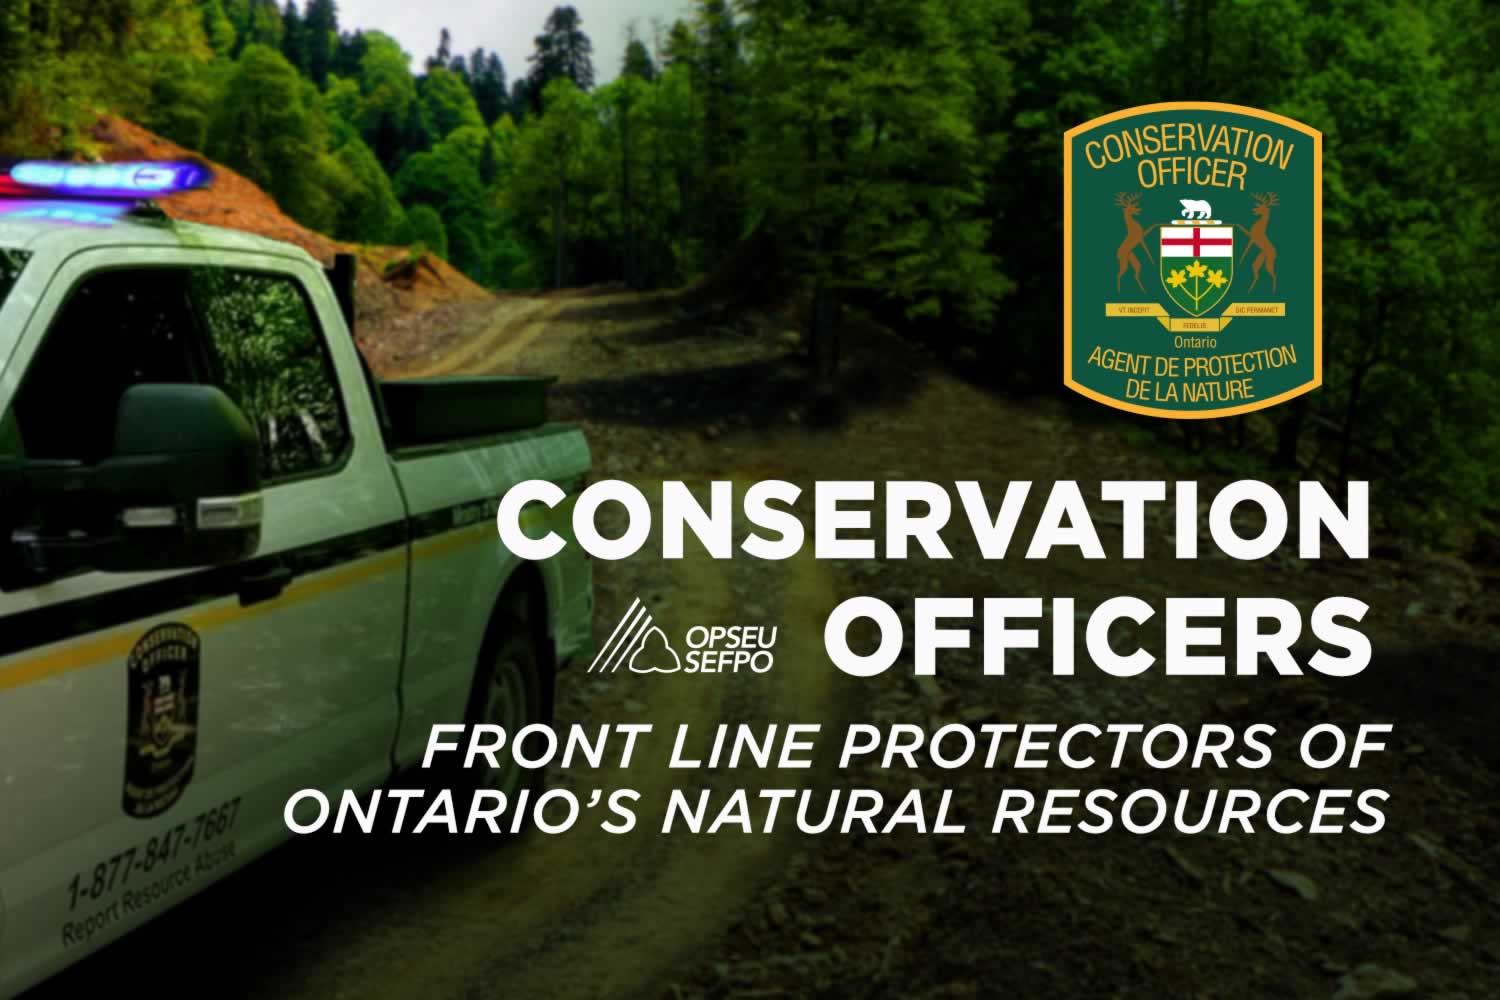 Conservations officers: Front line protectors of Ontario's natural resources